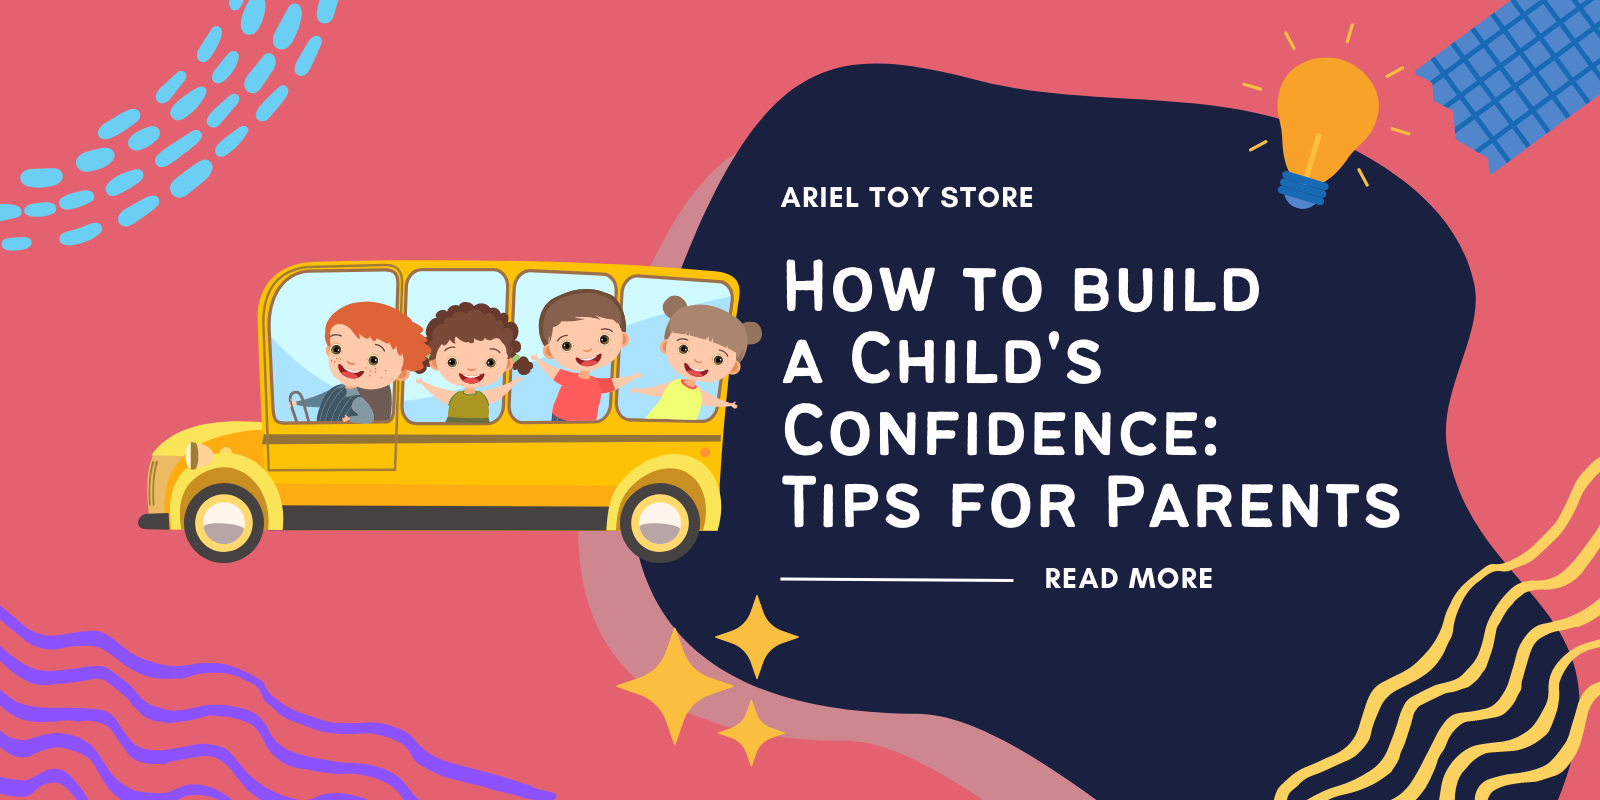 How to Build a Child's Confidence: 4 Tips for Parents